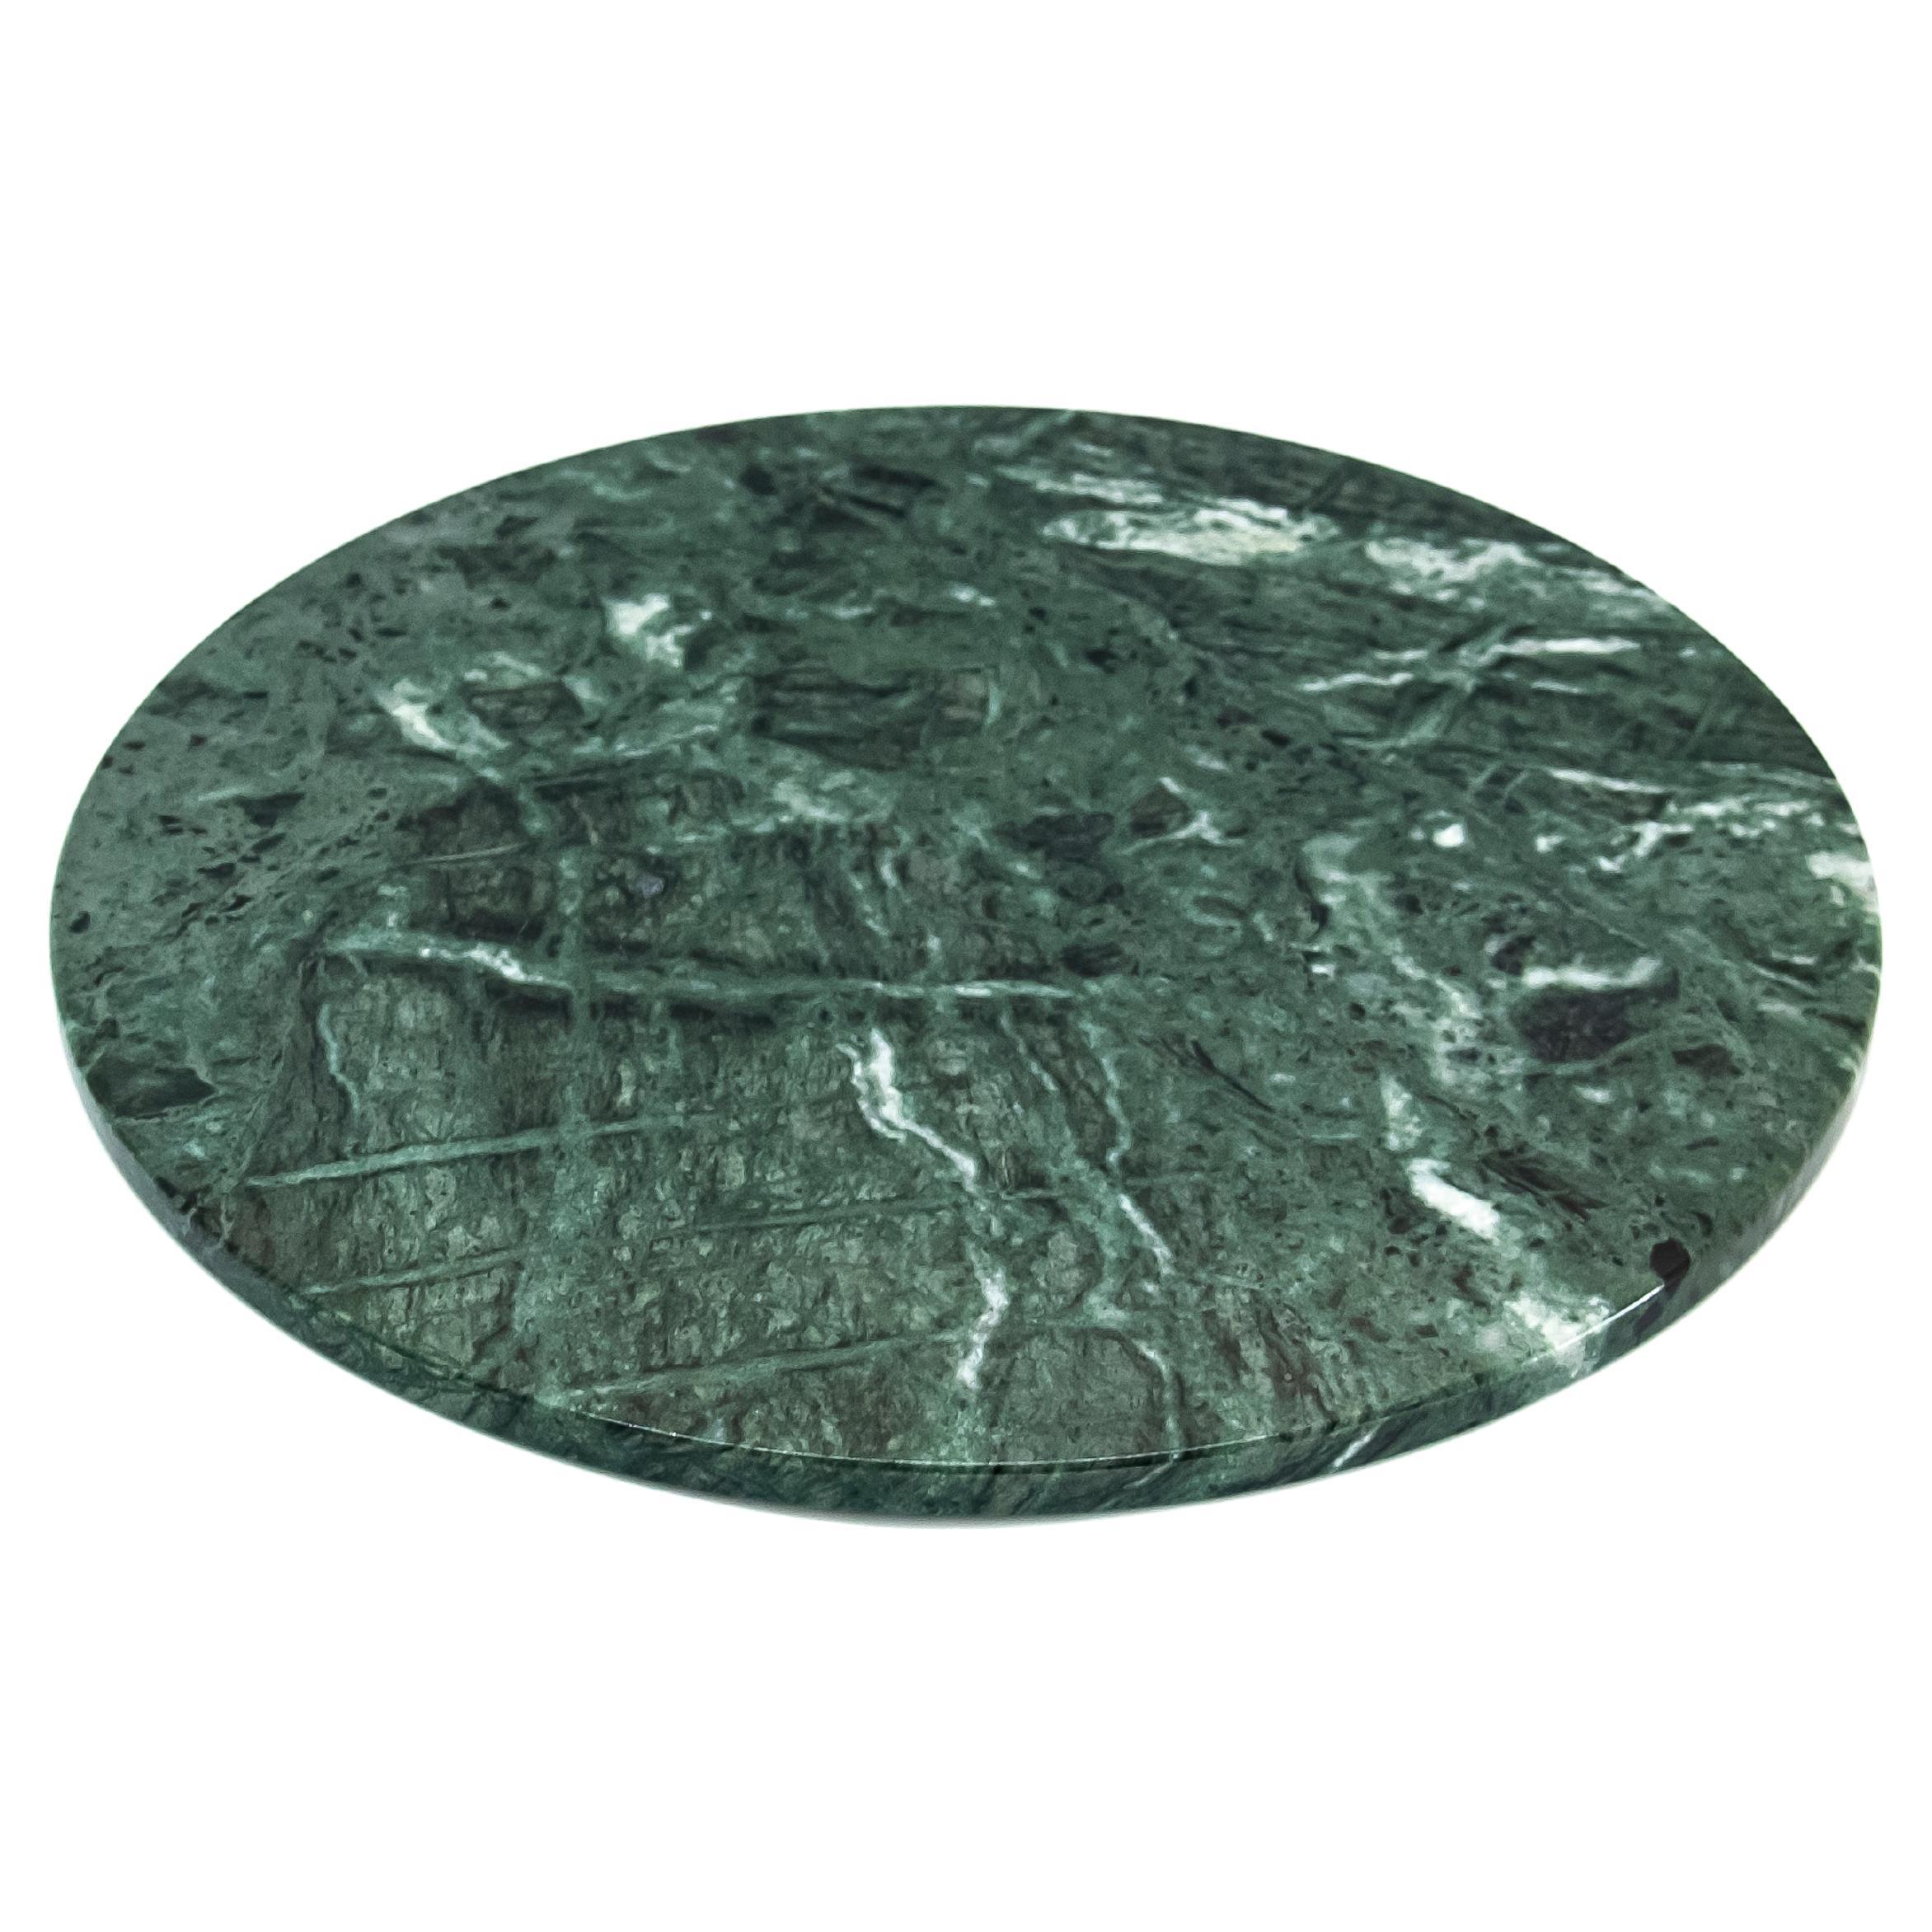 Handmade Rounded Green Guatemala Marble Cheese Plate